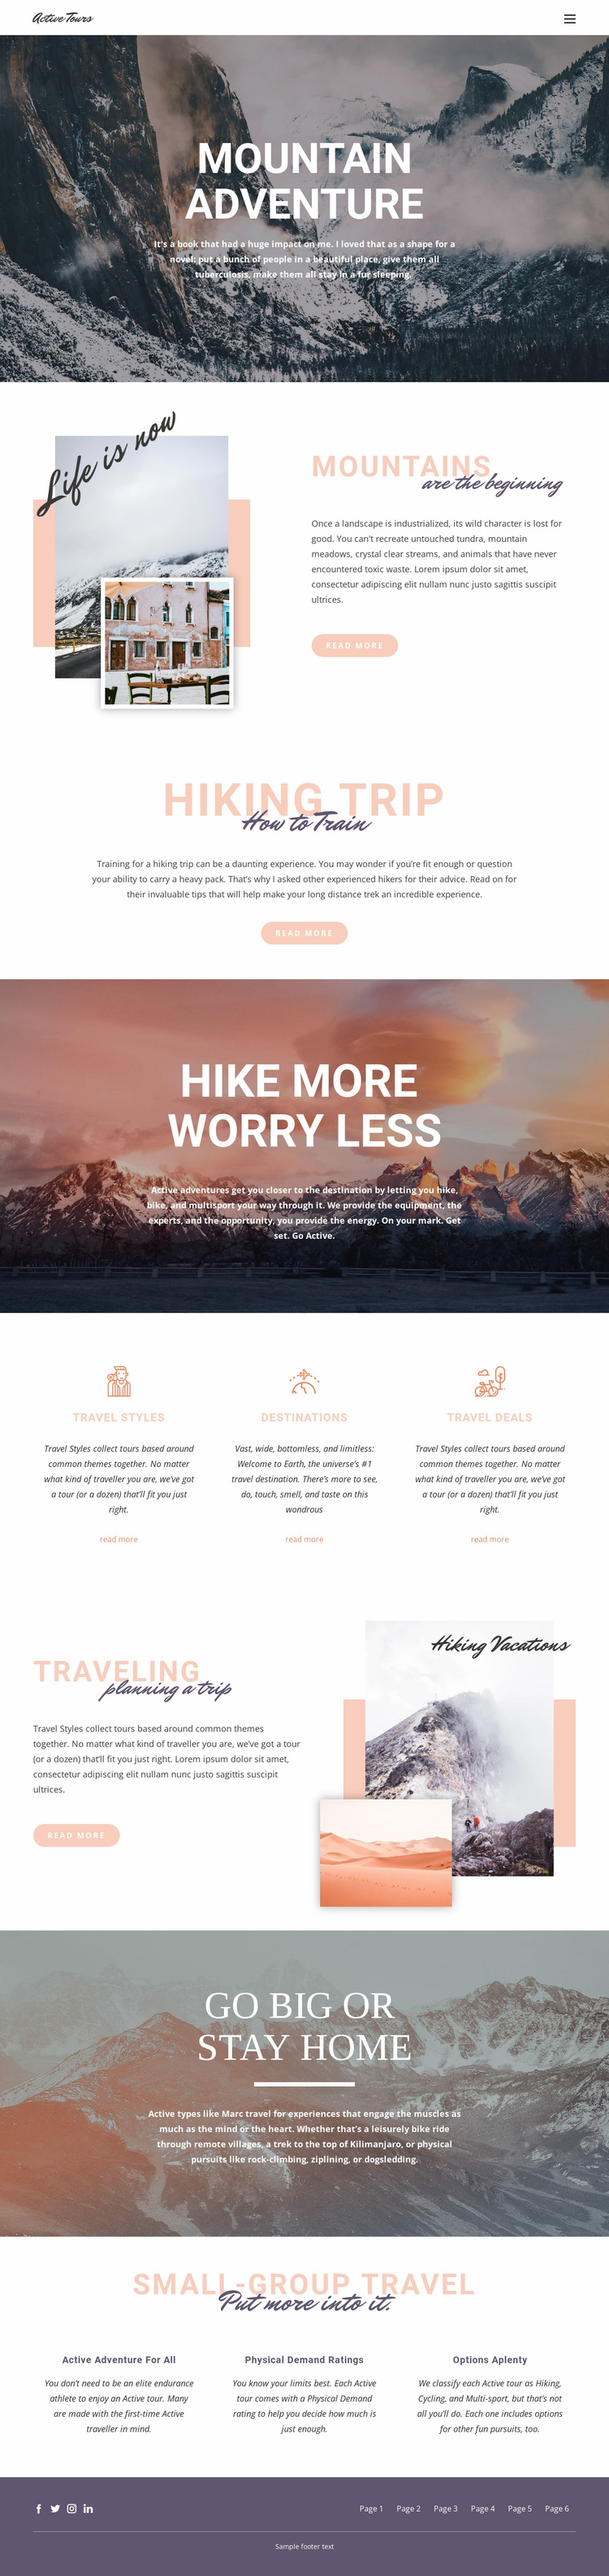 Guided backpacking trips Website Template